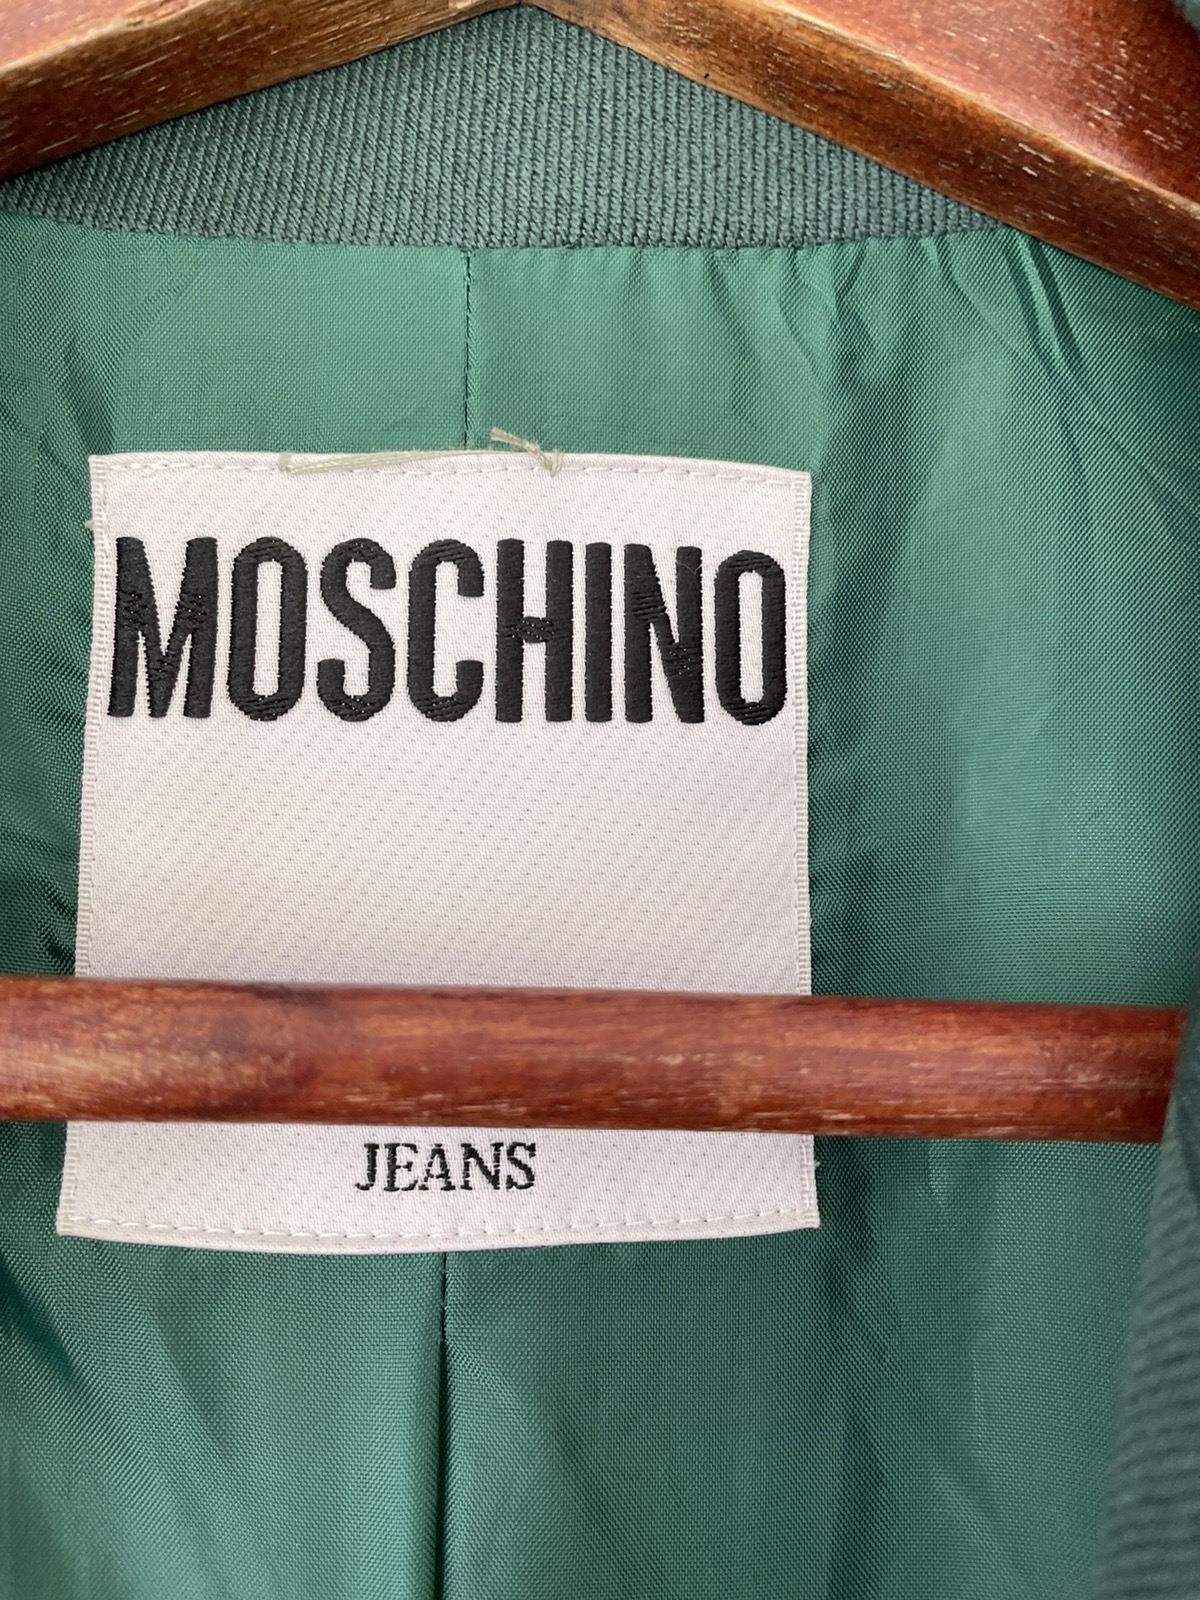 MOSCHINO JEANS JACKET - 6